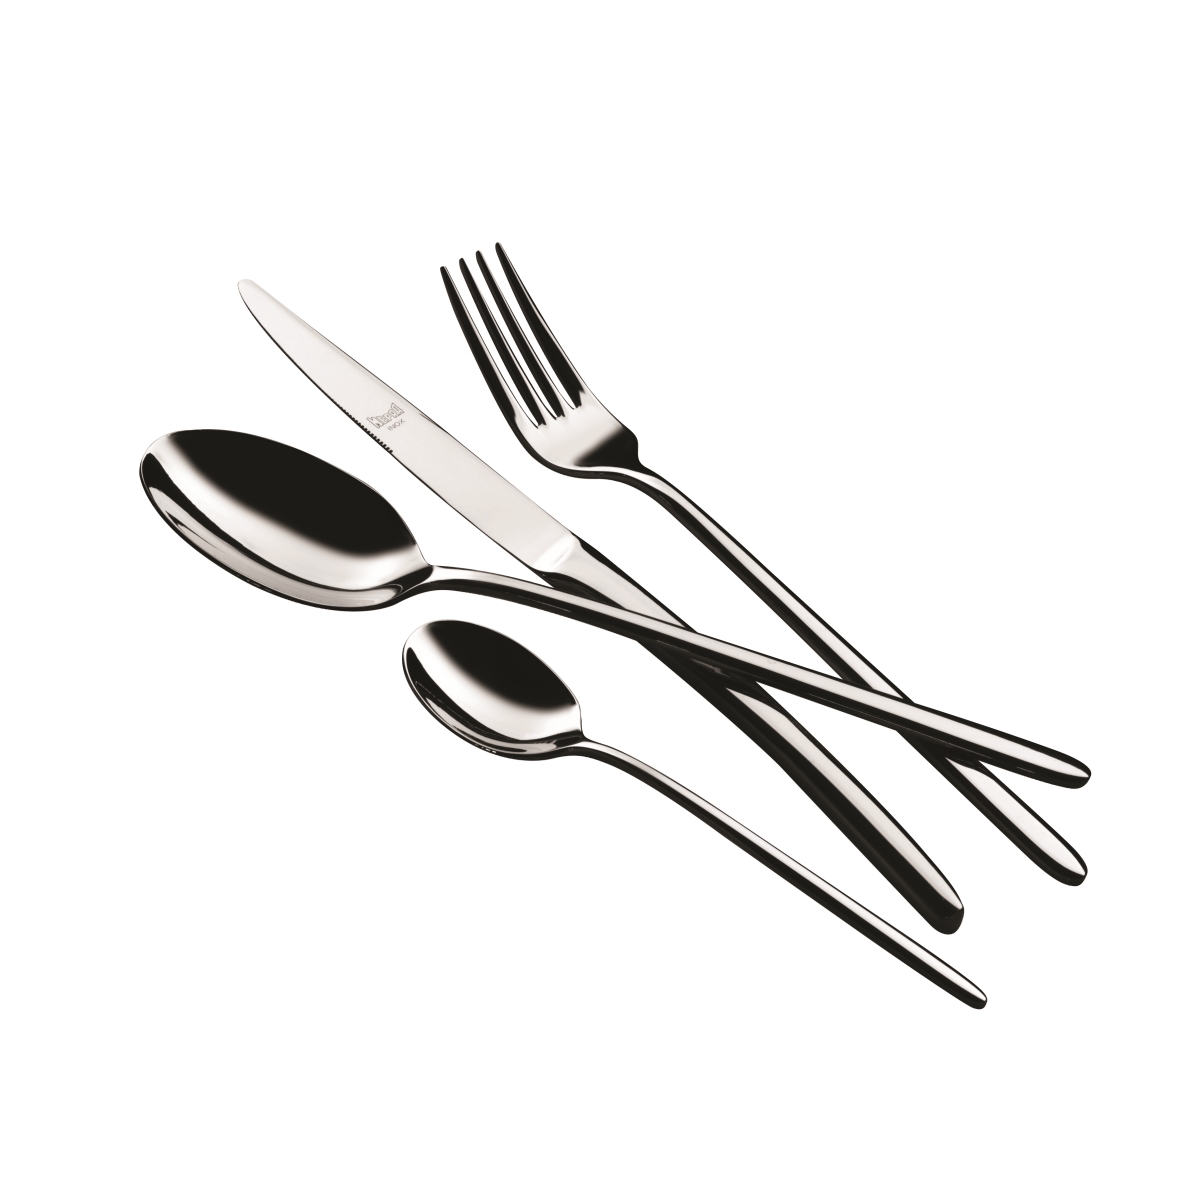 Picture of Mepra 108322024 Mosella Cutlery Set - 24 Piece